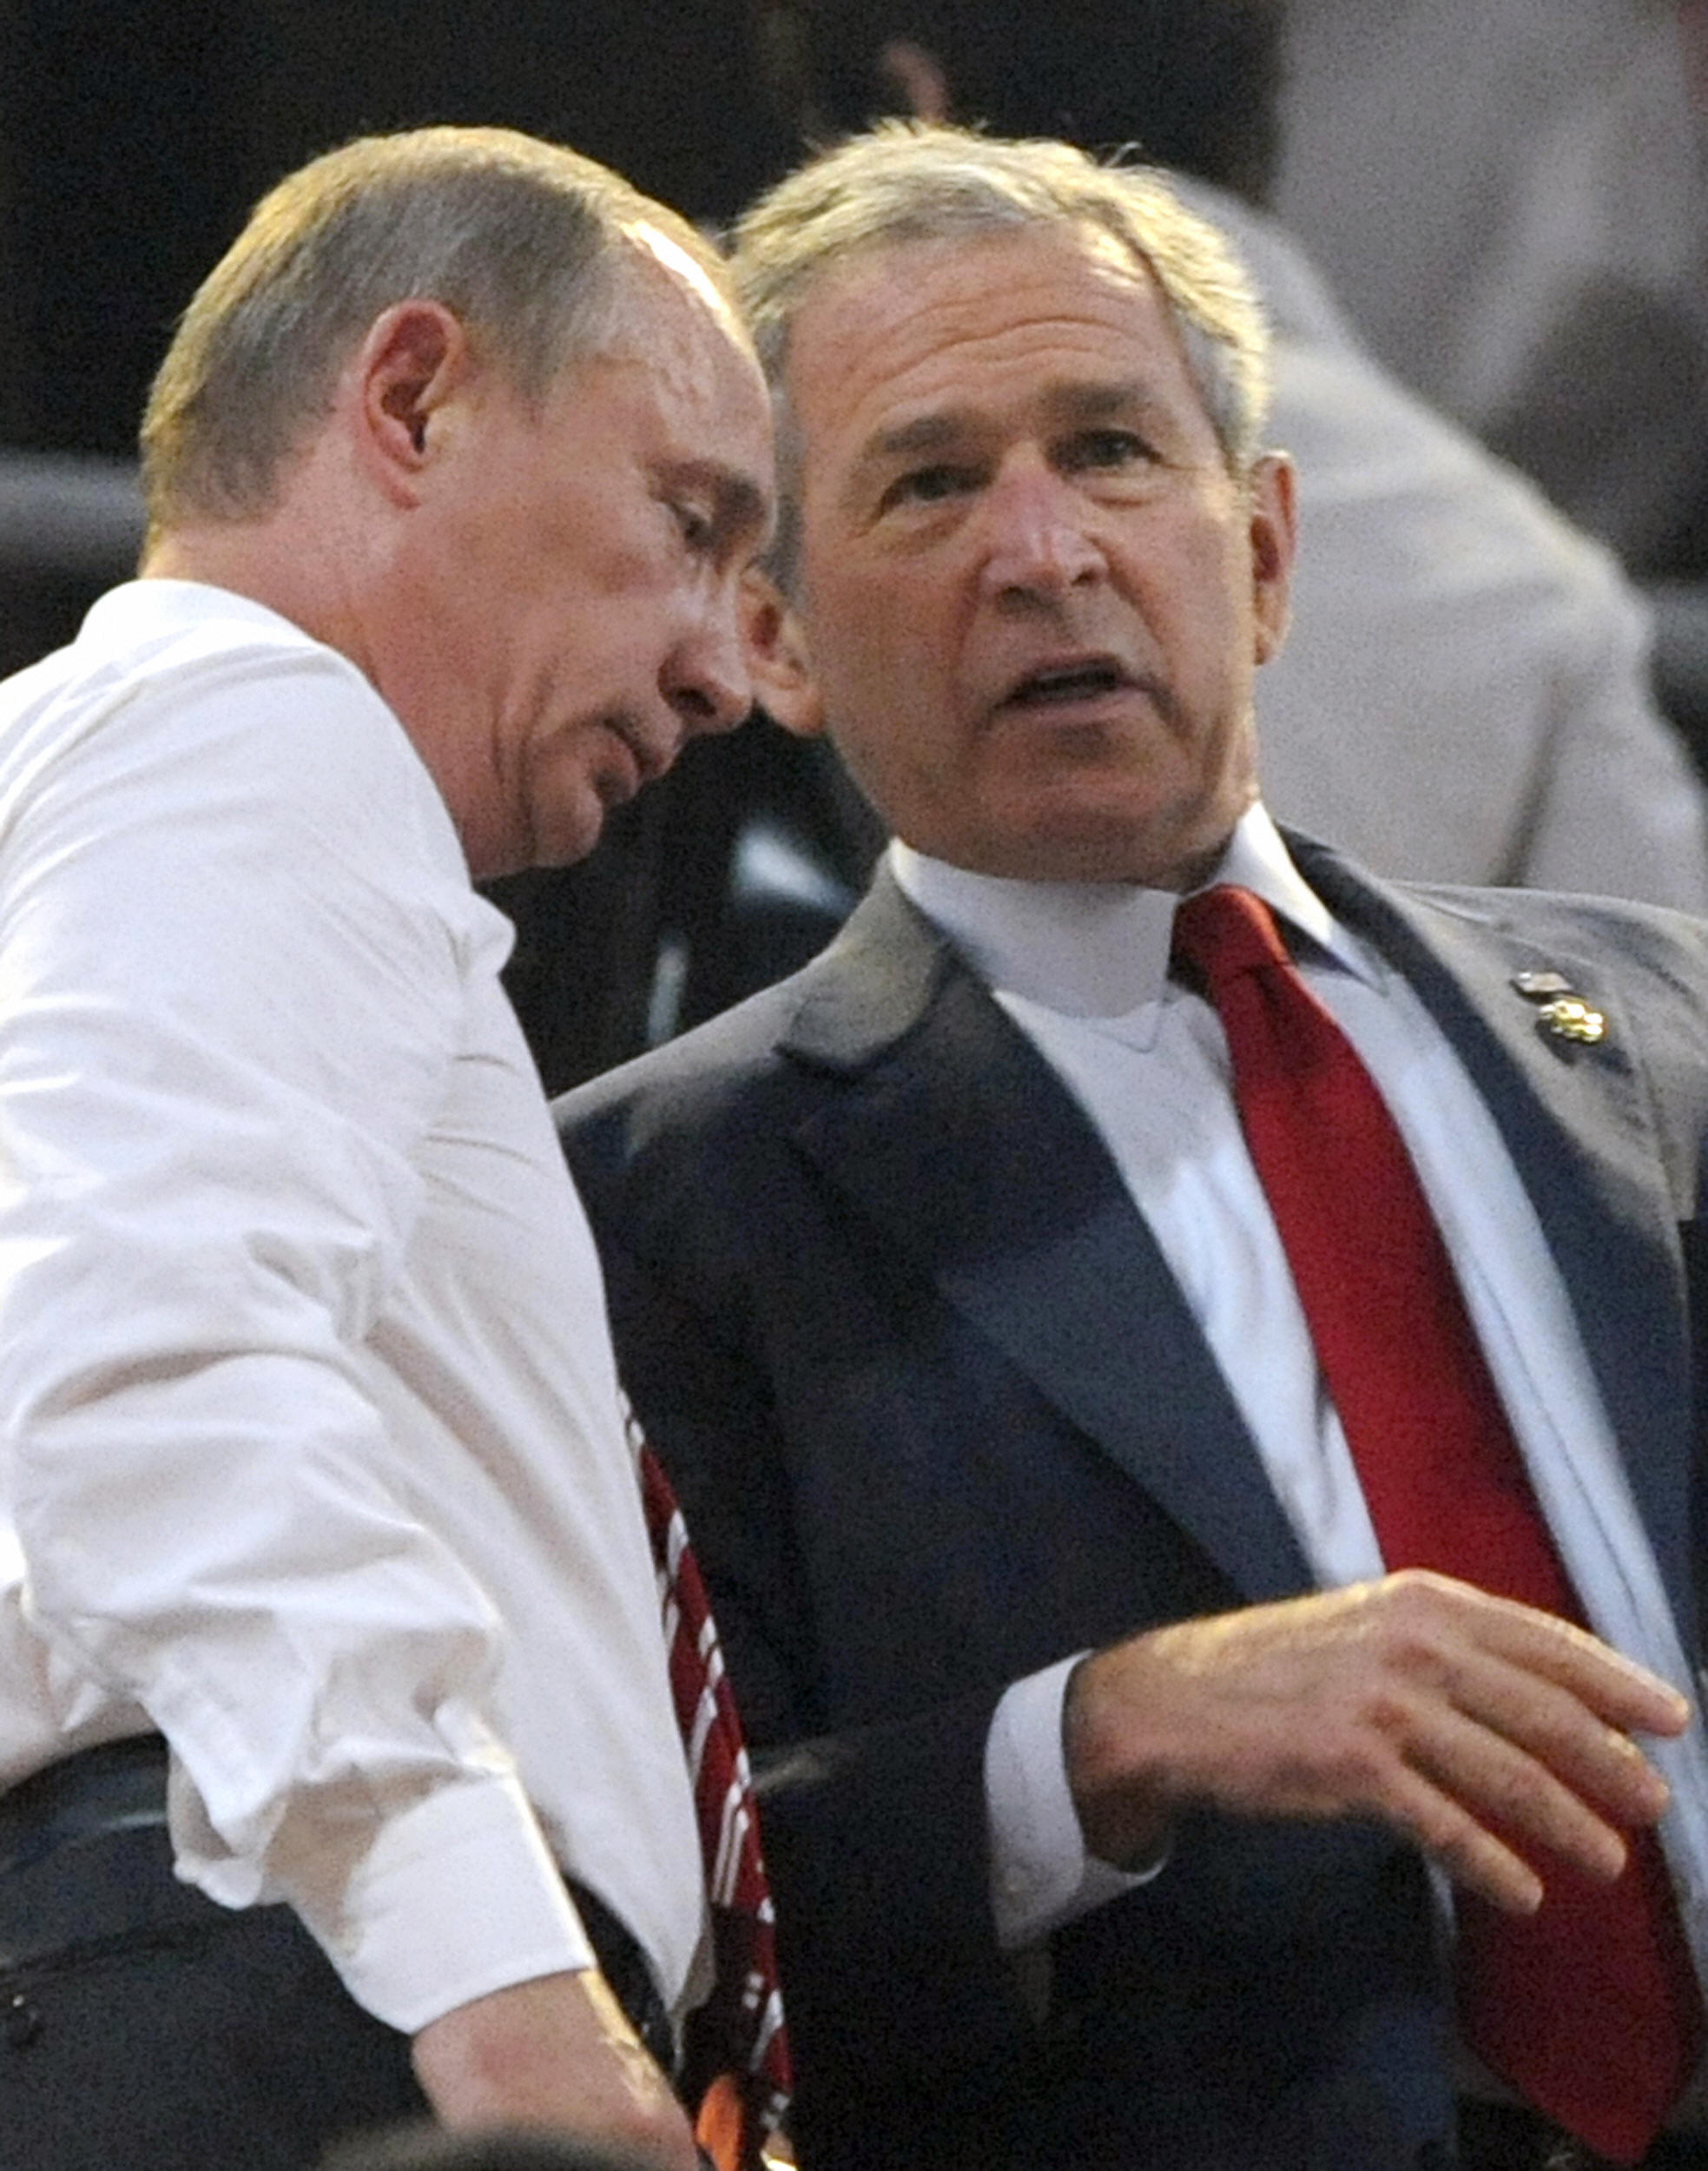 PHOTO: Russian Prime Mininster Vladimir Putin (L) talks with US President George W. Bush at the start of the opening ceremony of the 2008 Beijing Olympic Games in Beijing on August 8, 2008. 